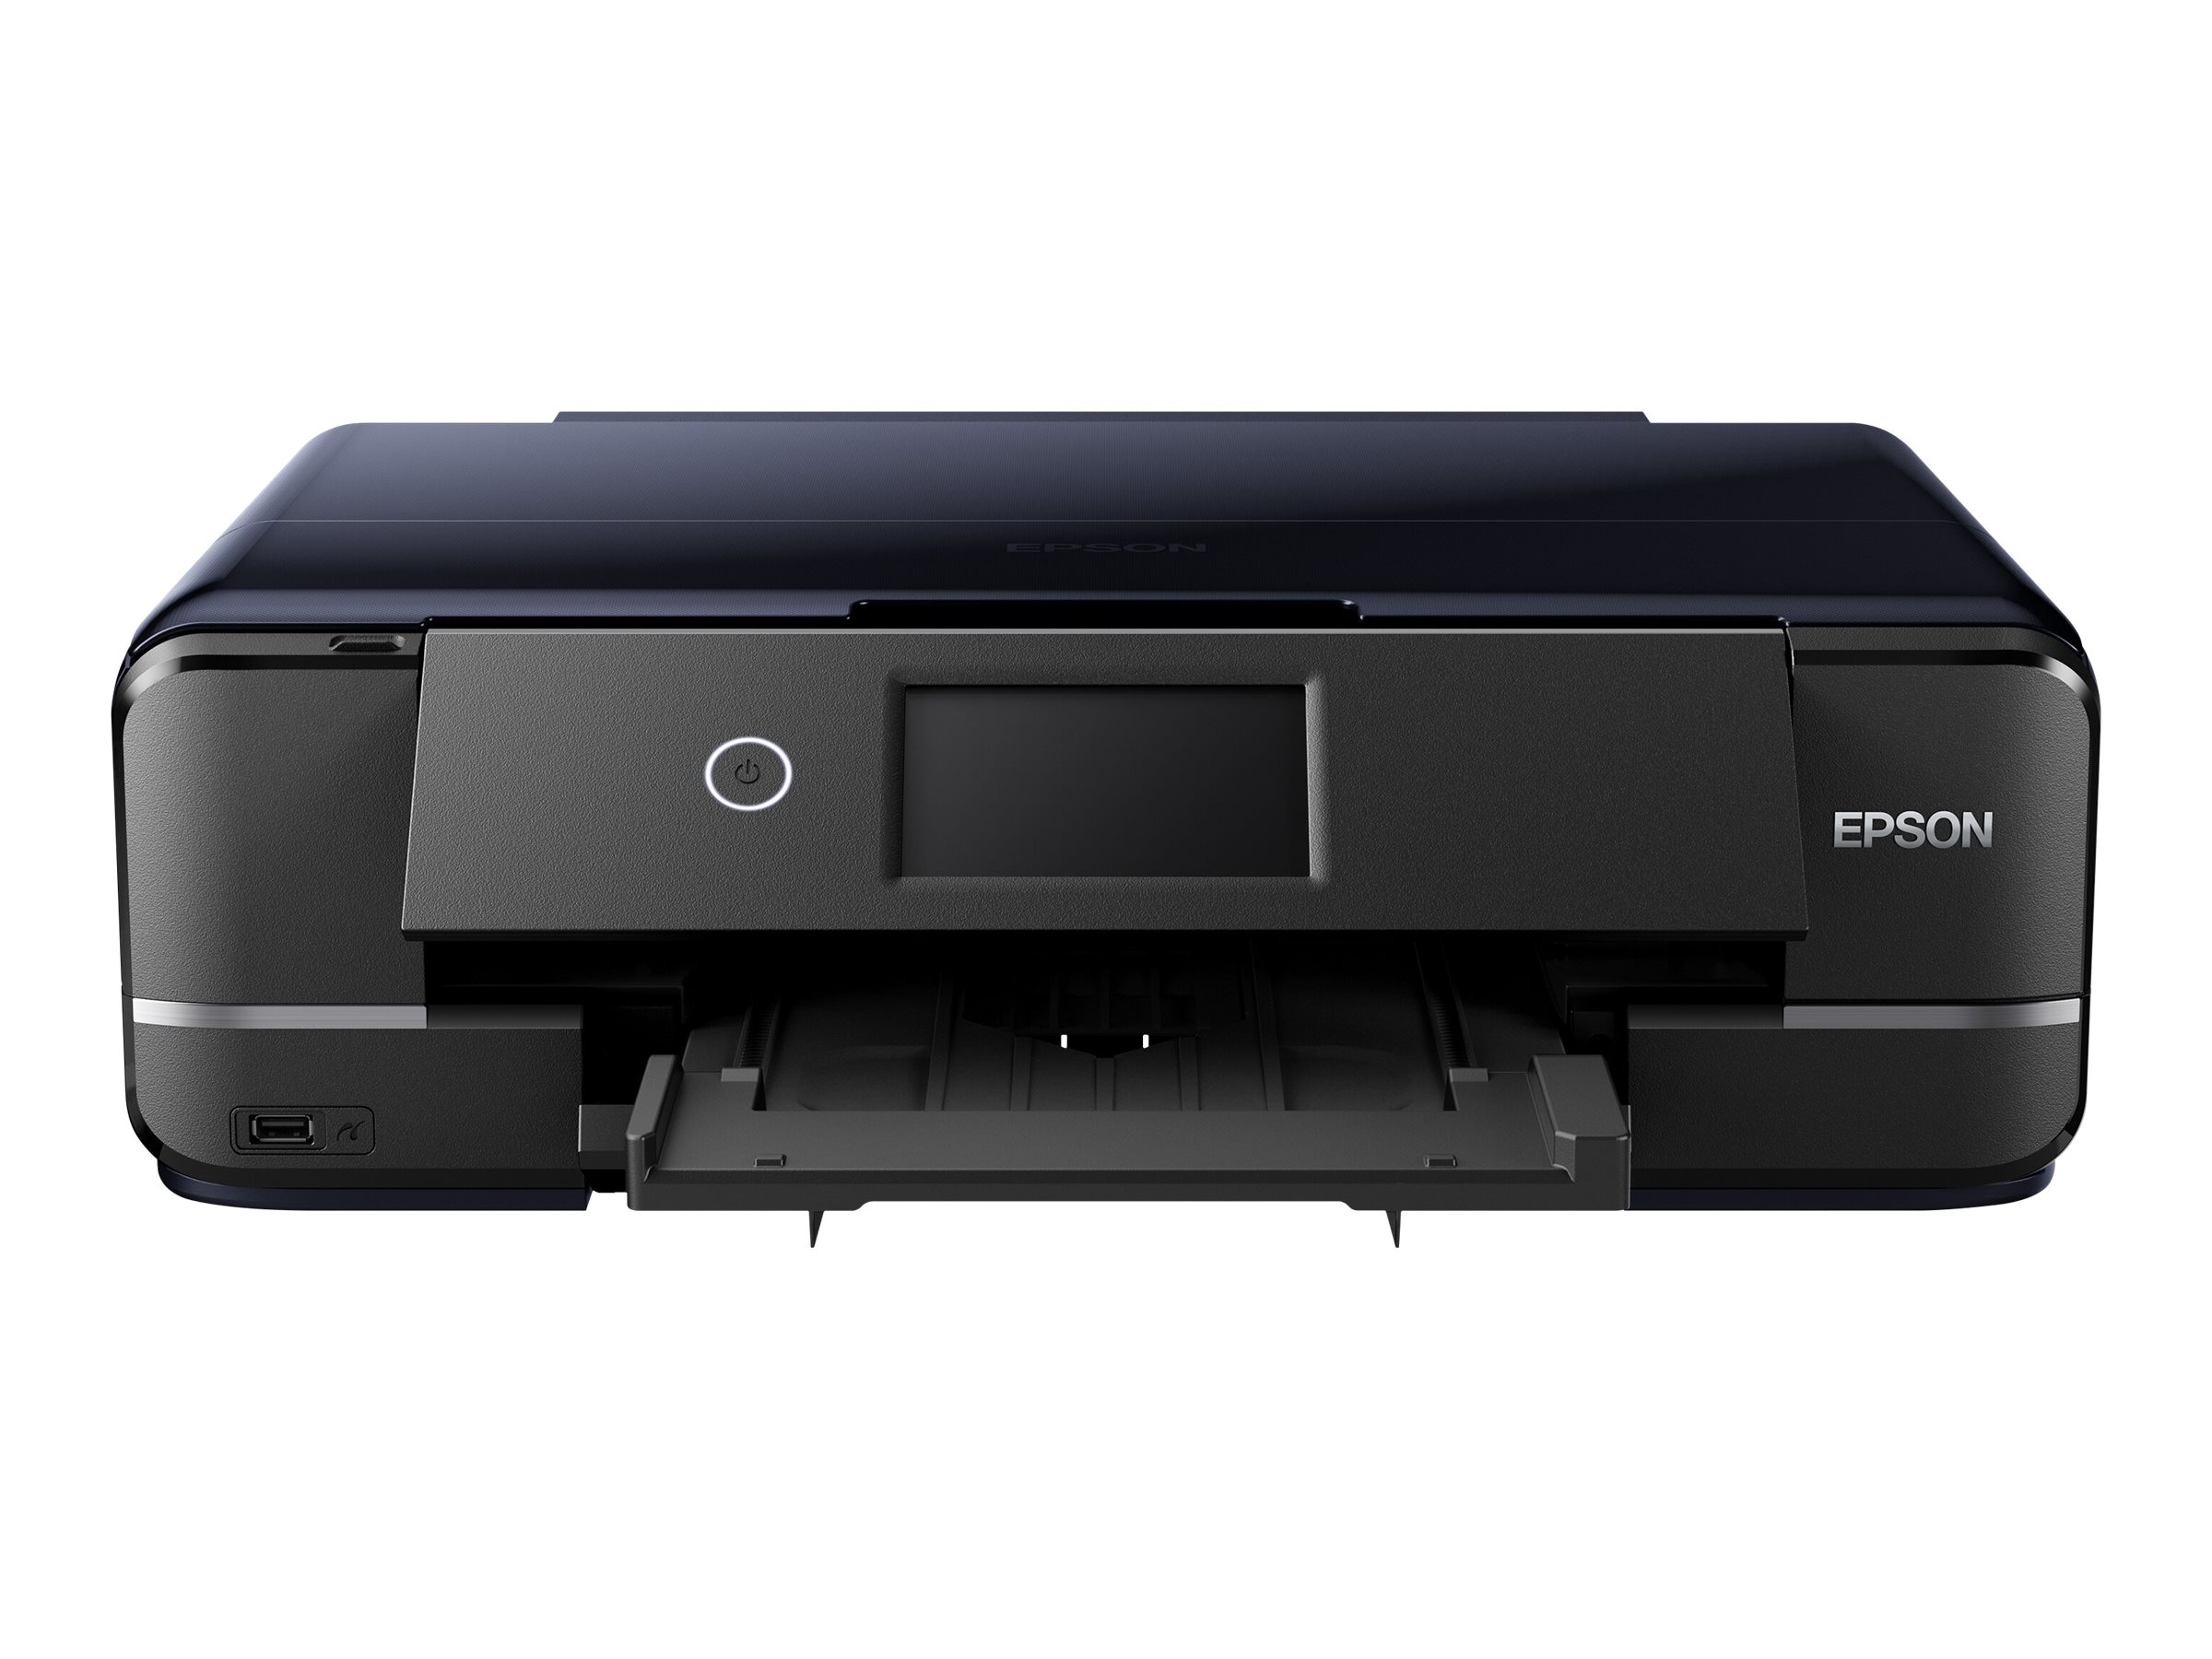 Epson Expression Photo XP-970 Small-in-One - Multifunktionsdrucker - Farbe - Tintenstrahl - A4 (210 x 297 mm)